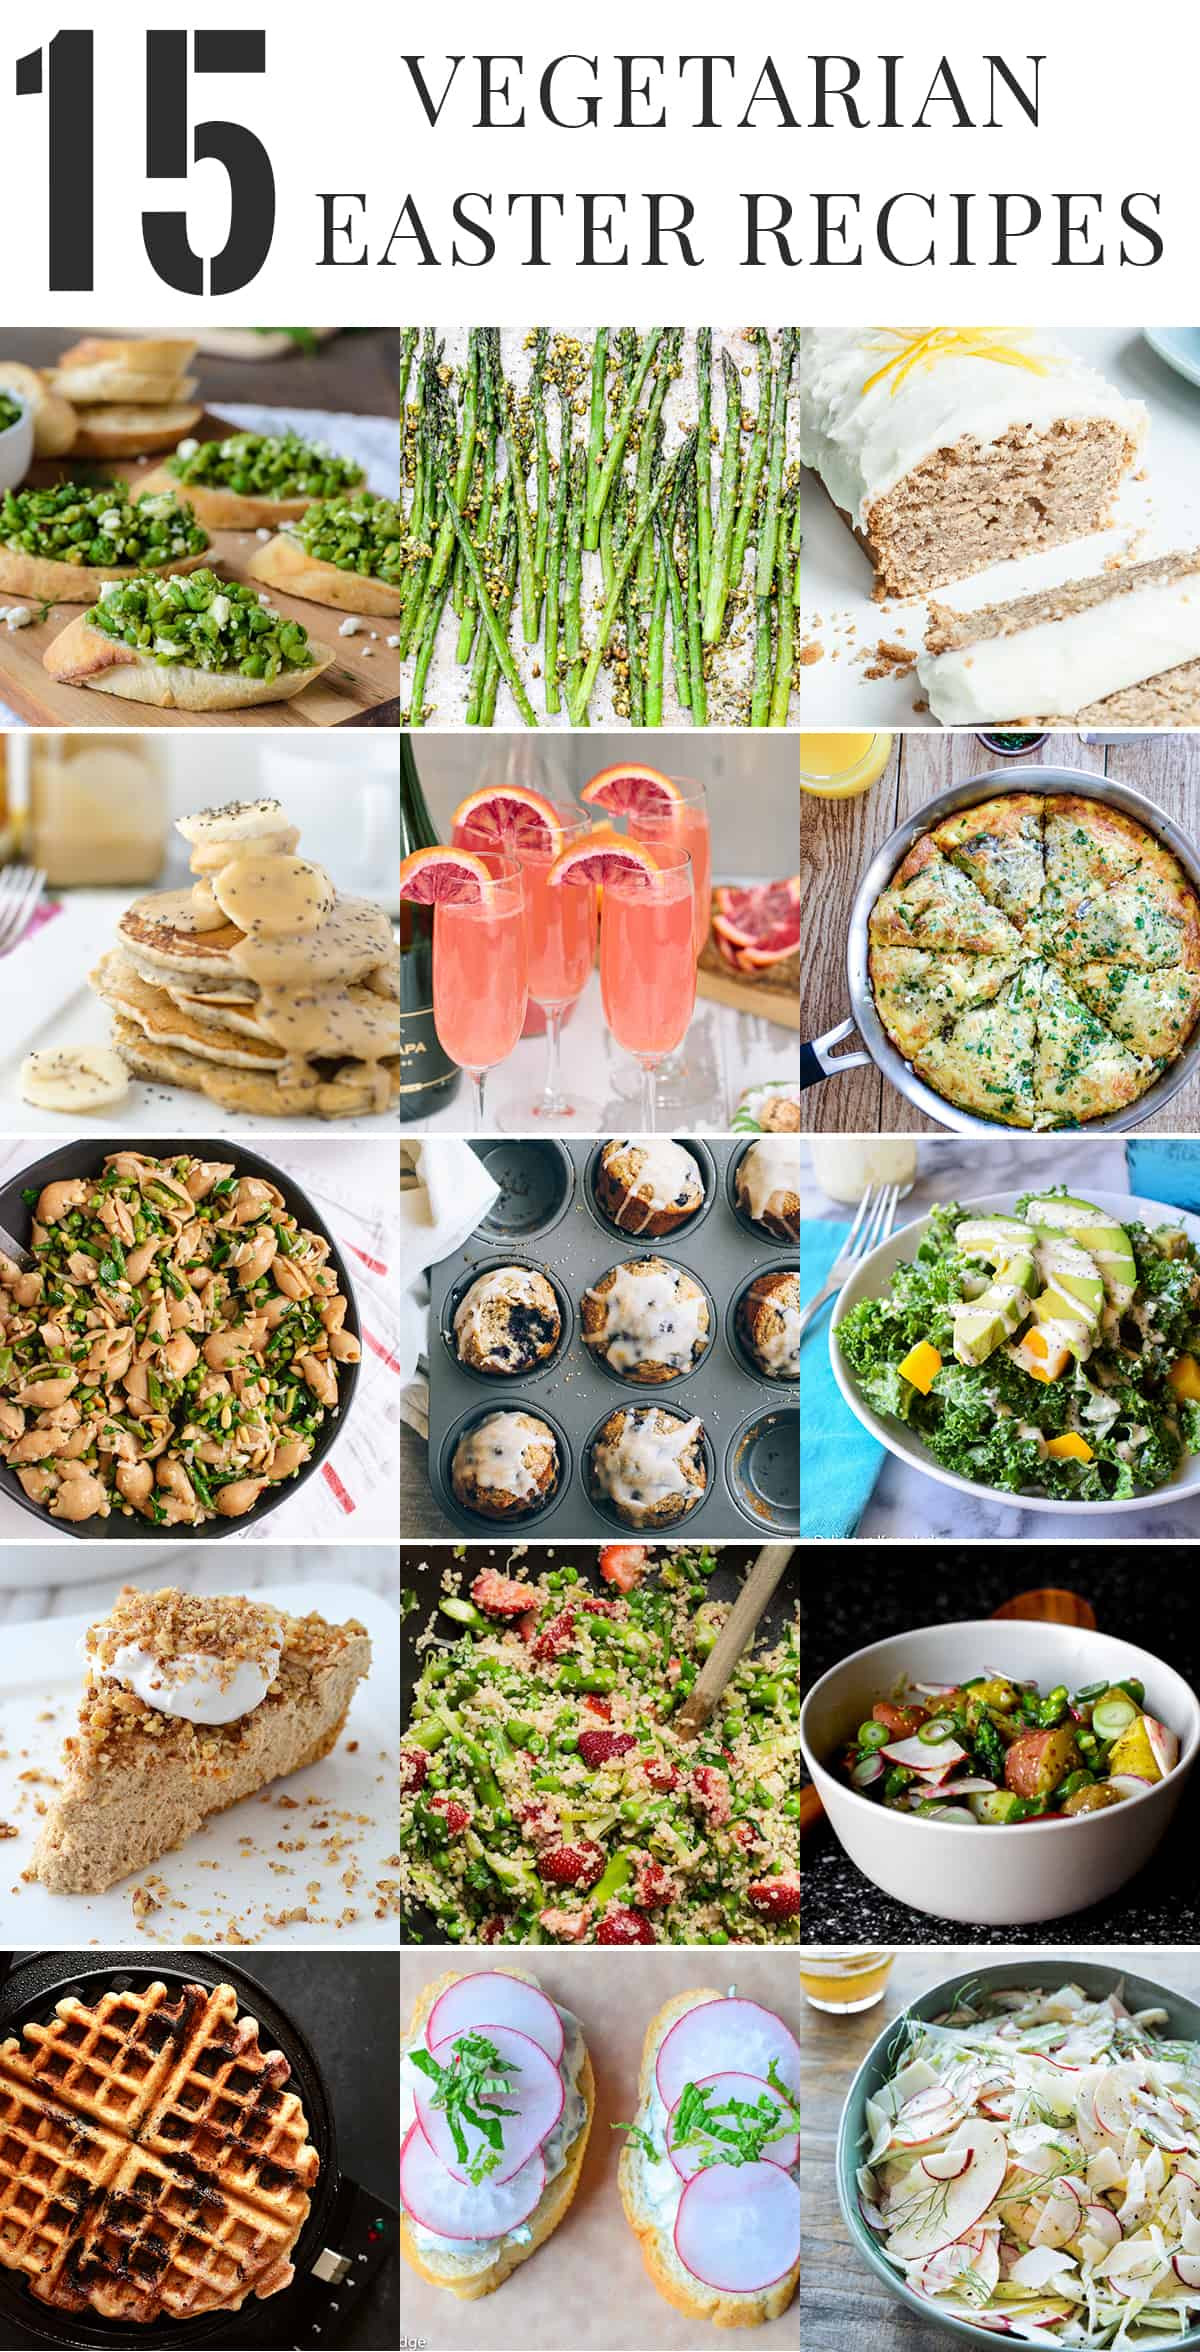 Vegetarian Easter Brunch Recipes
 Healthy Ve arian Easter Recipes Delish Knowledge